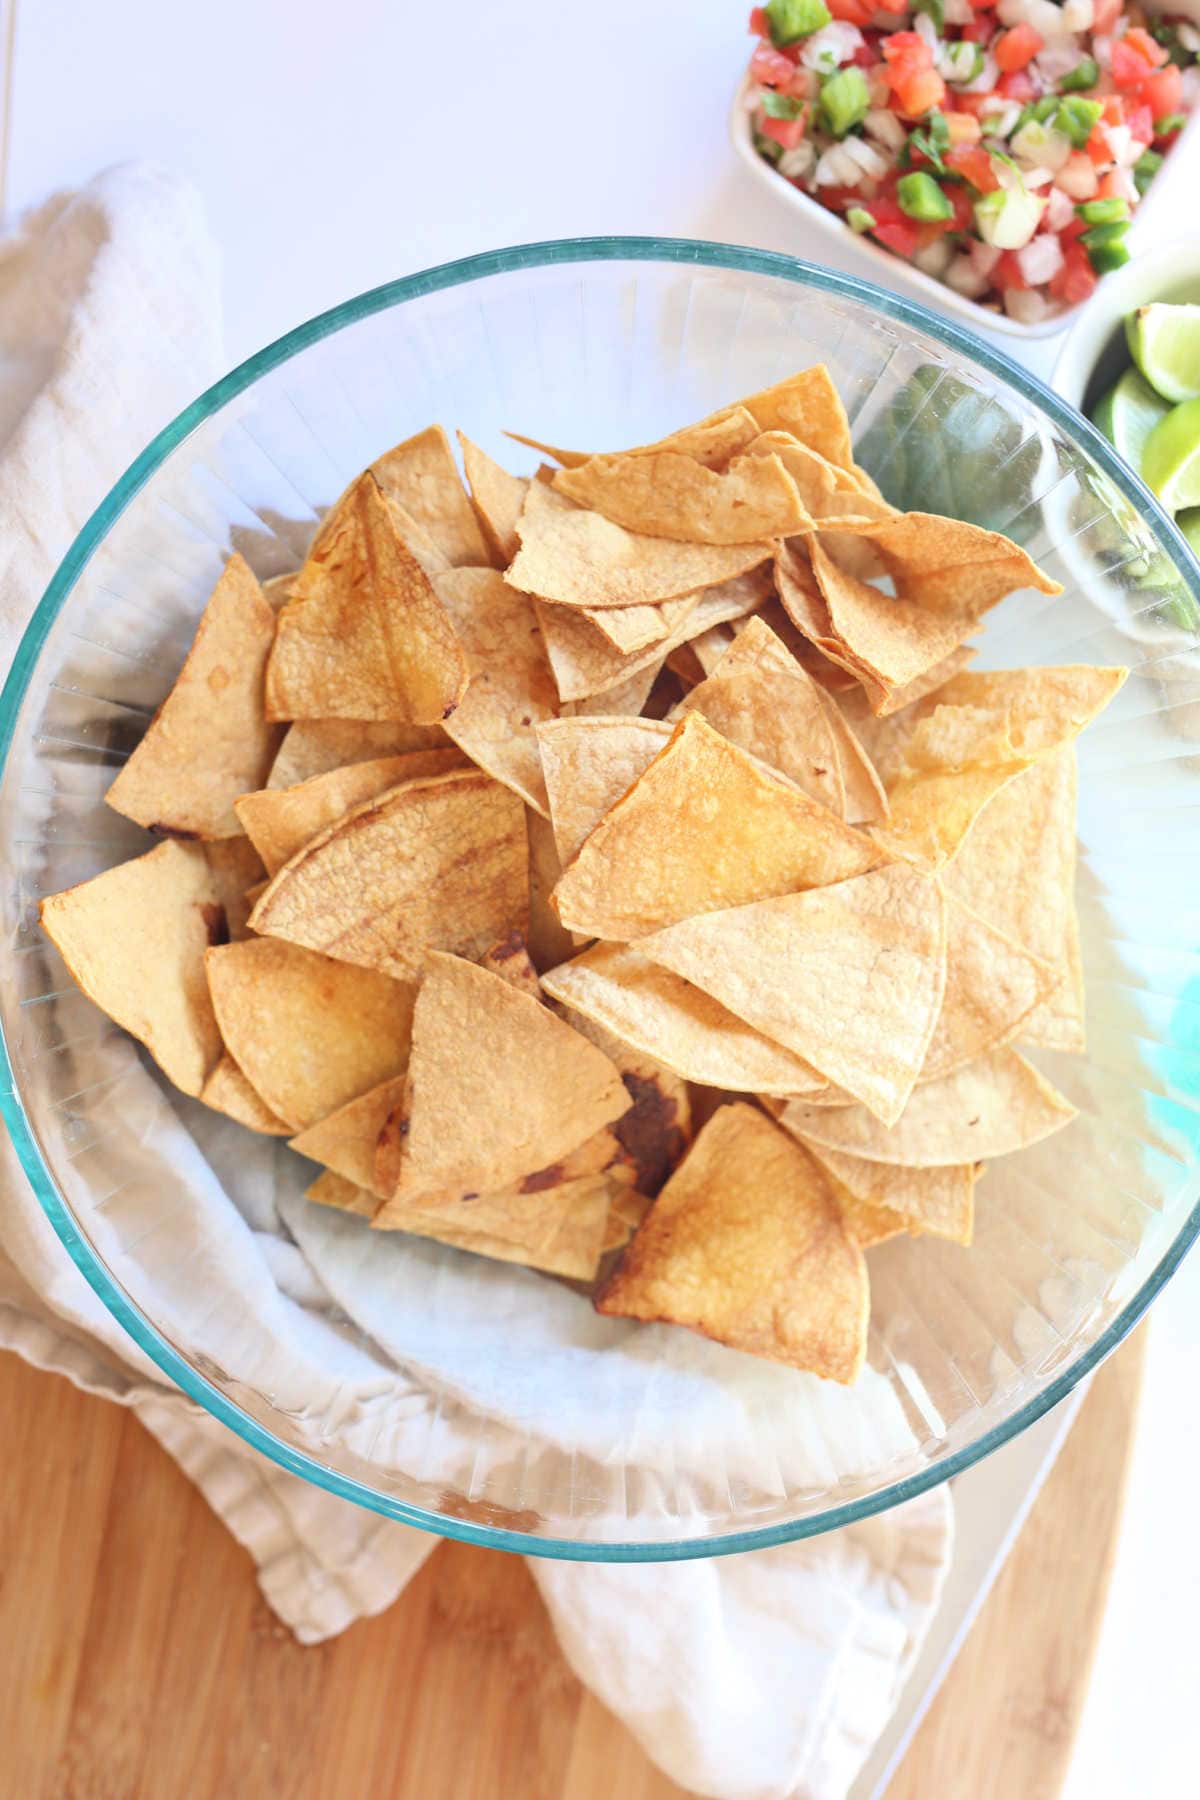 homemade tortilla chips baked in the oven and served in a bowl